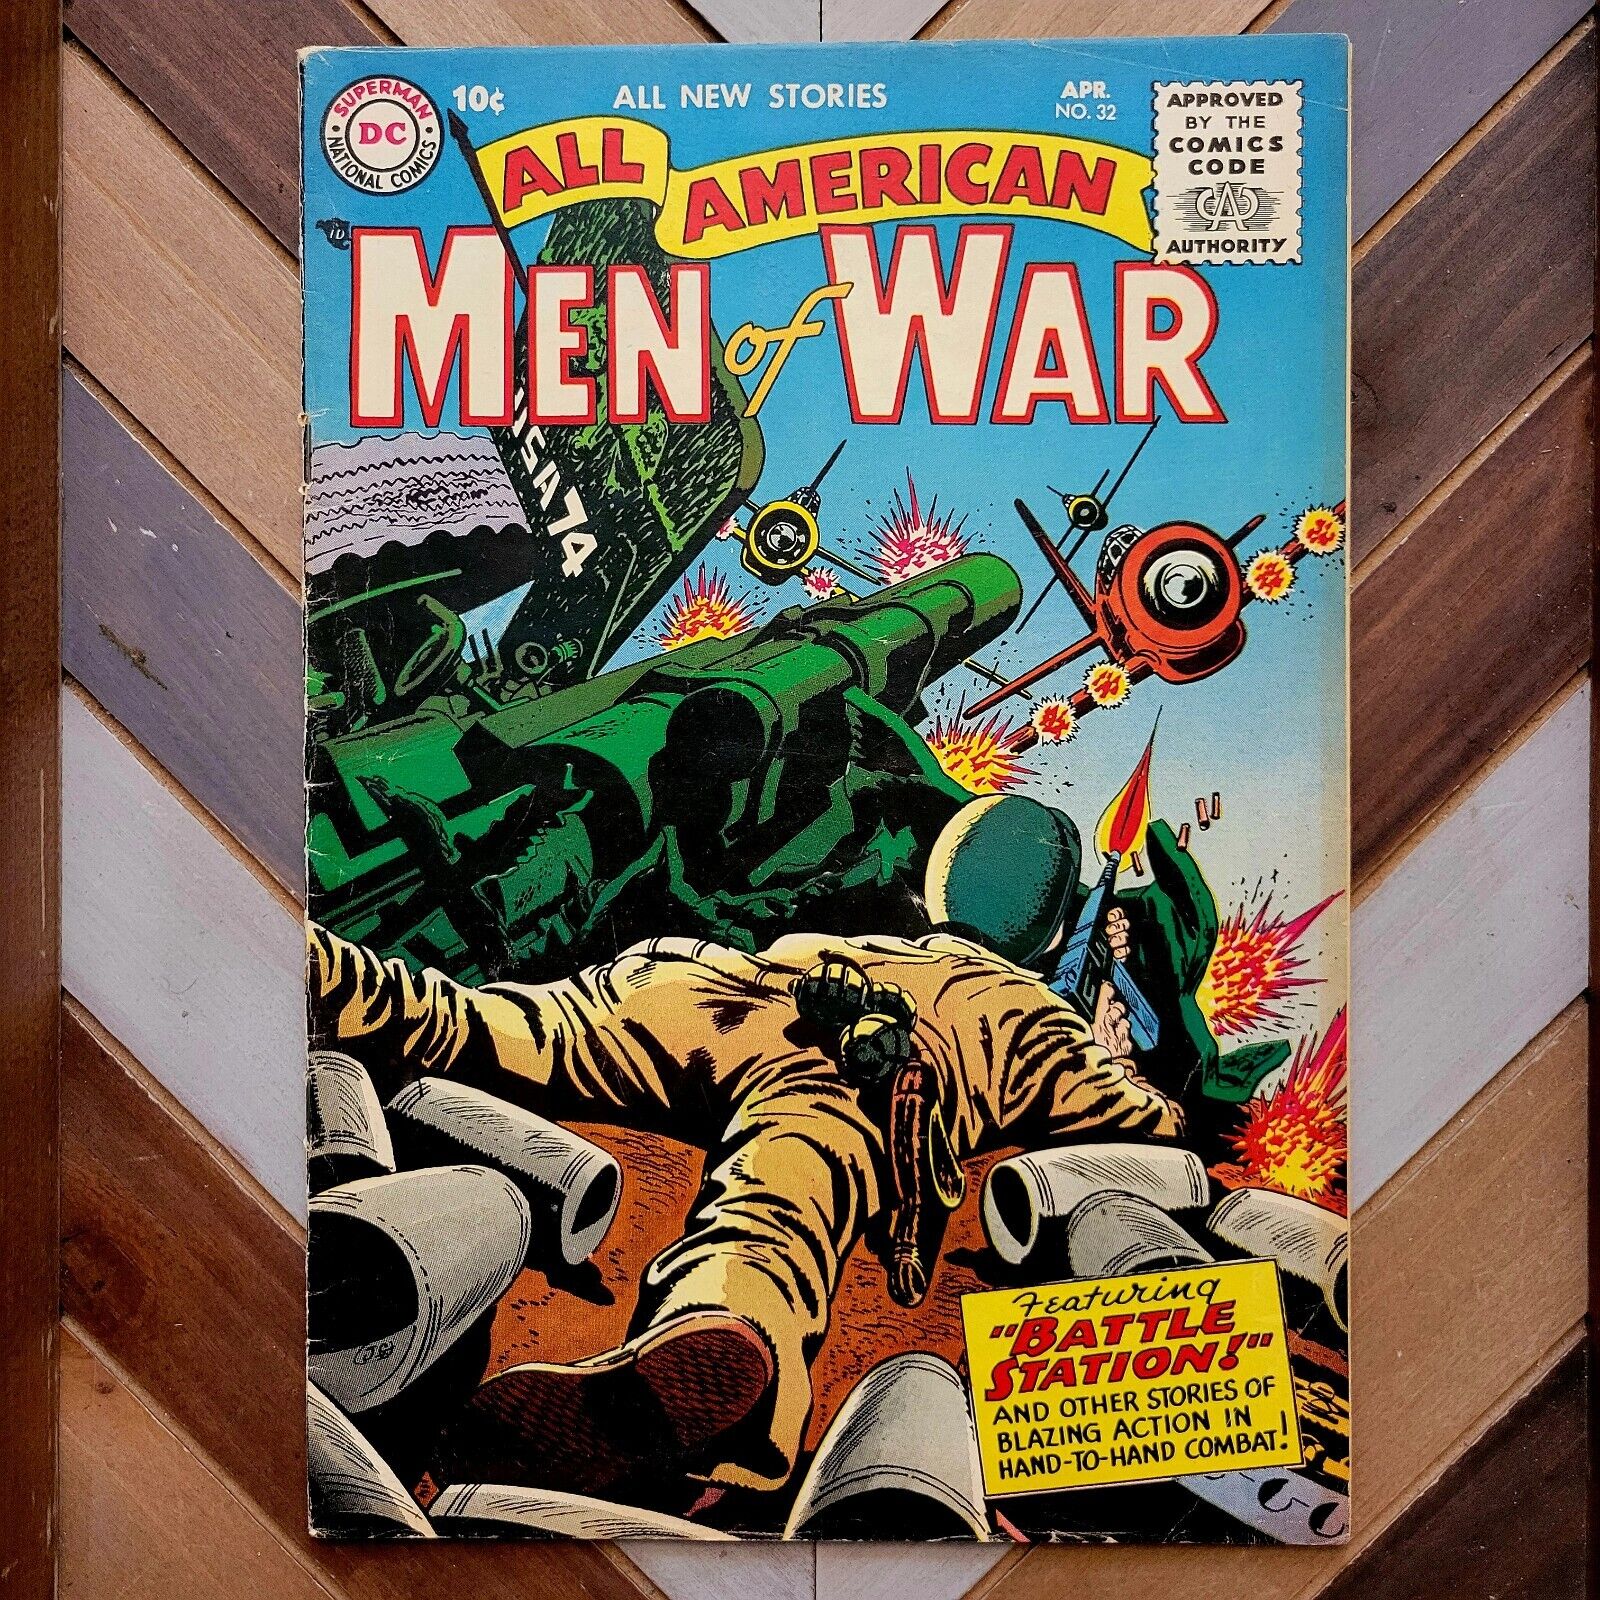 ALL-AMERICAN MEN OF WAR #32 VG/FN (DC 1956) BATTLE STATION Wally Wood SILVER AGE